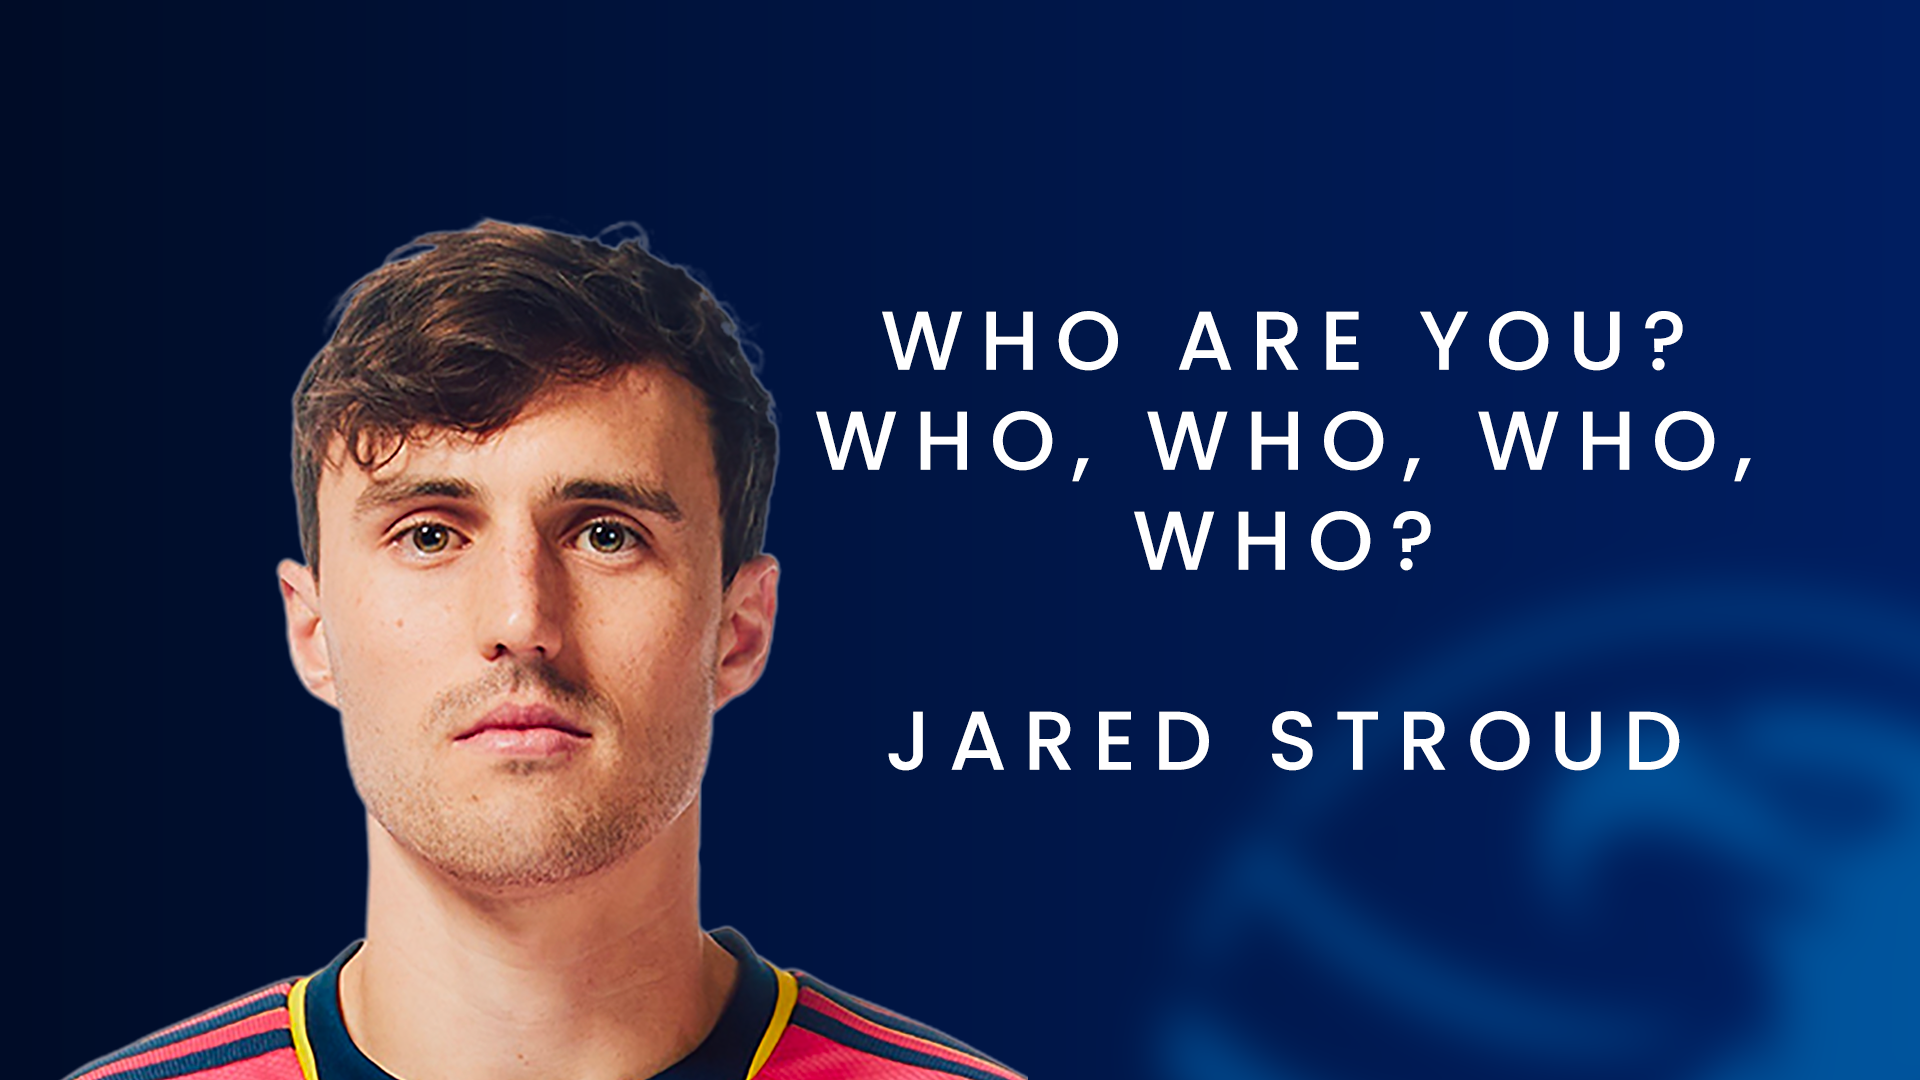 Who Are You? Who, who, who, who? Jared Stroud